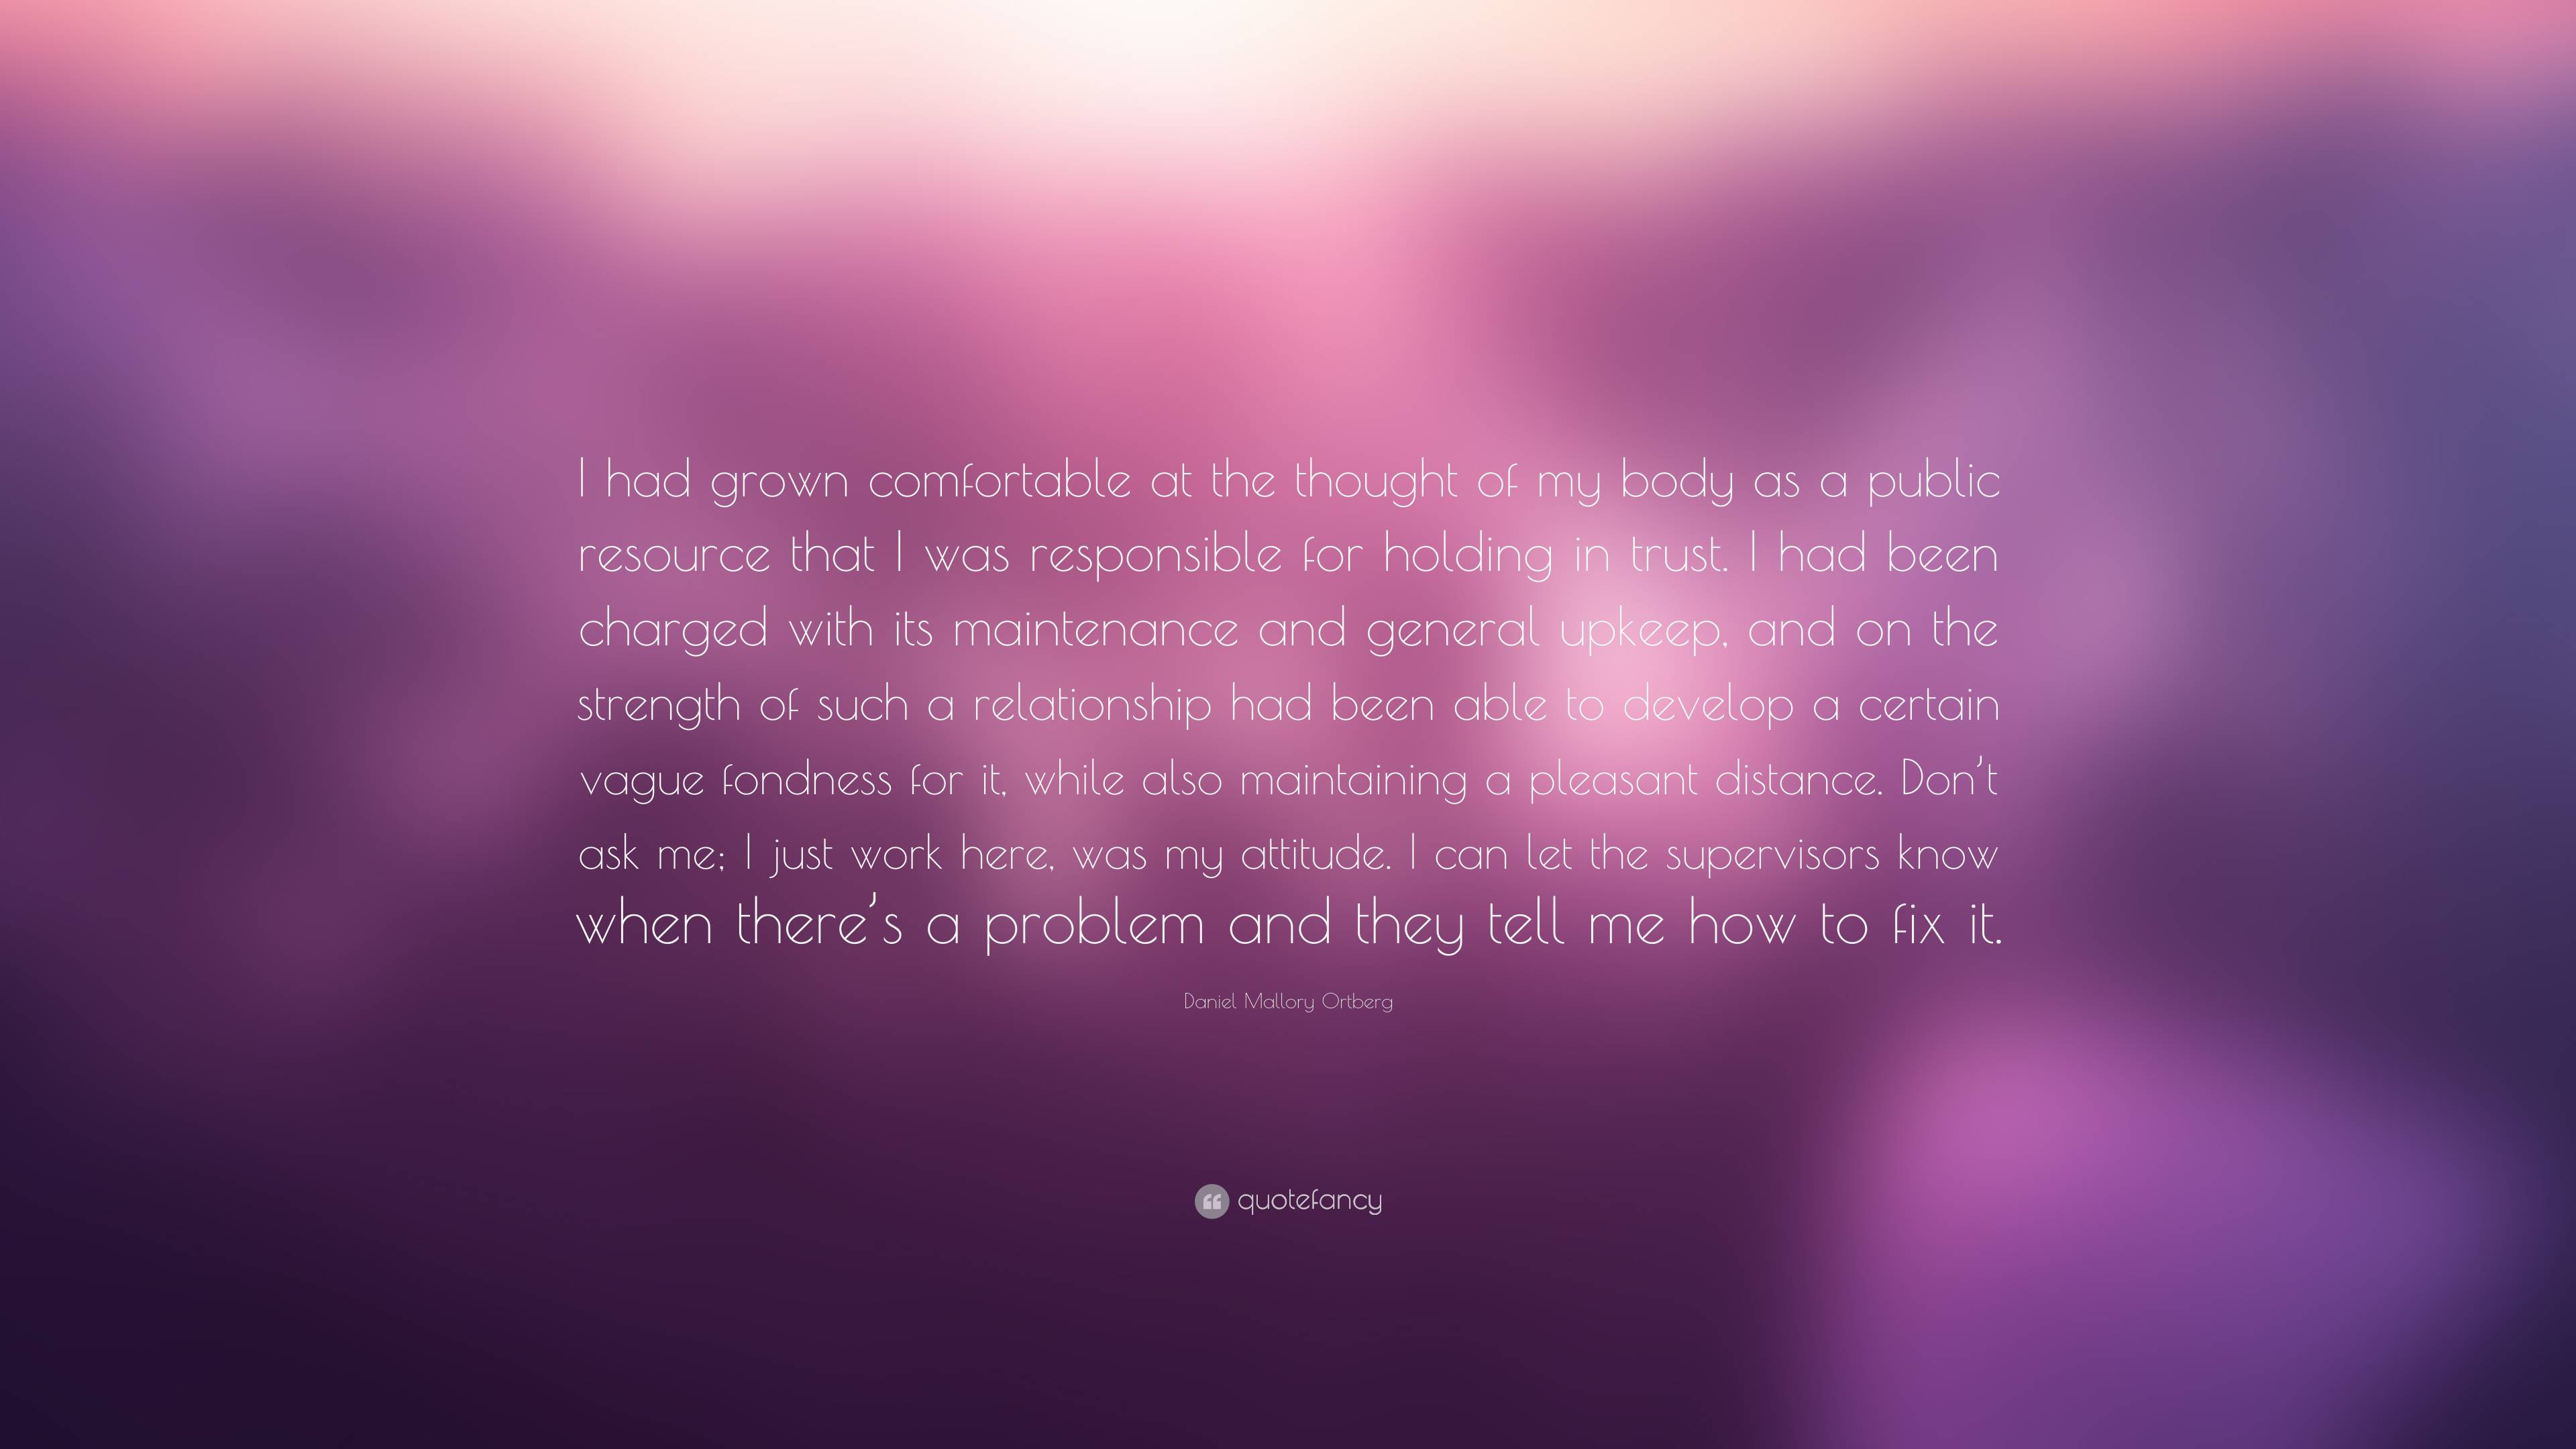 Daniel Mallory Ortberg Quote “i Had Grown Comfortable At The Thought Of My Body As A Public 